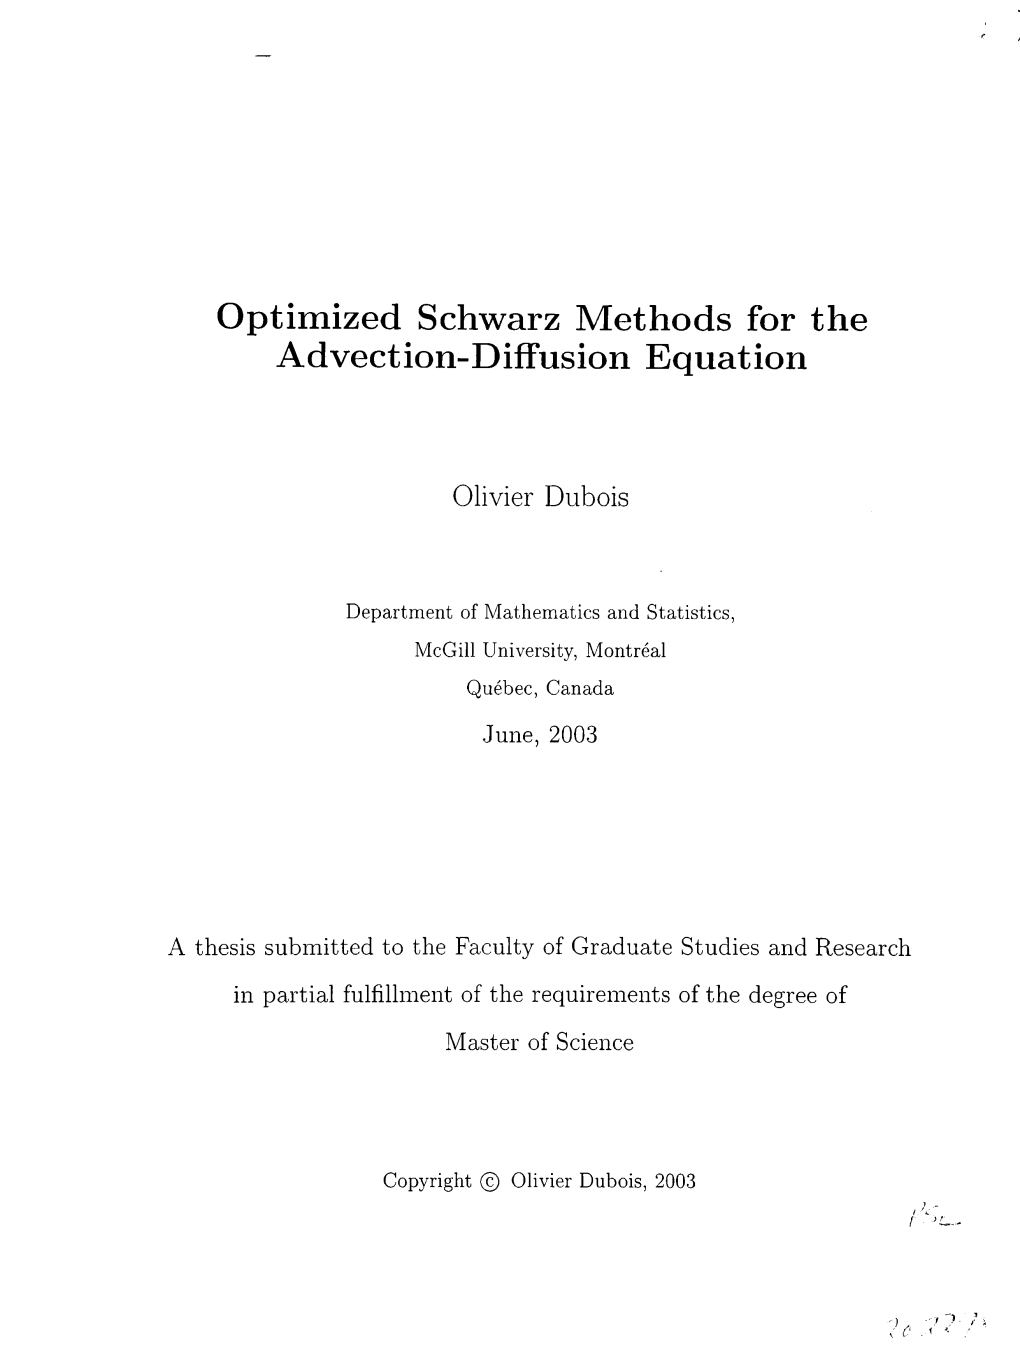 Optimized Schwarz Methods for the Advection-Diffusion Equation